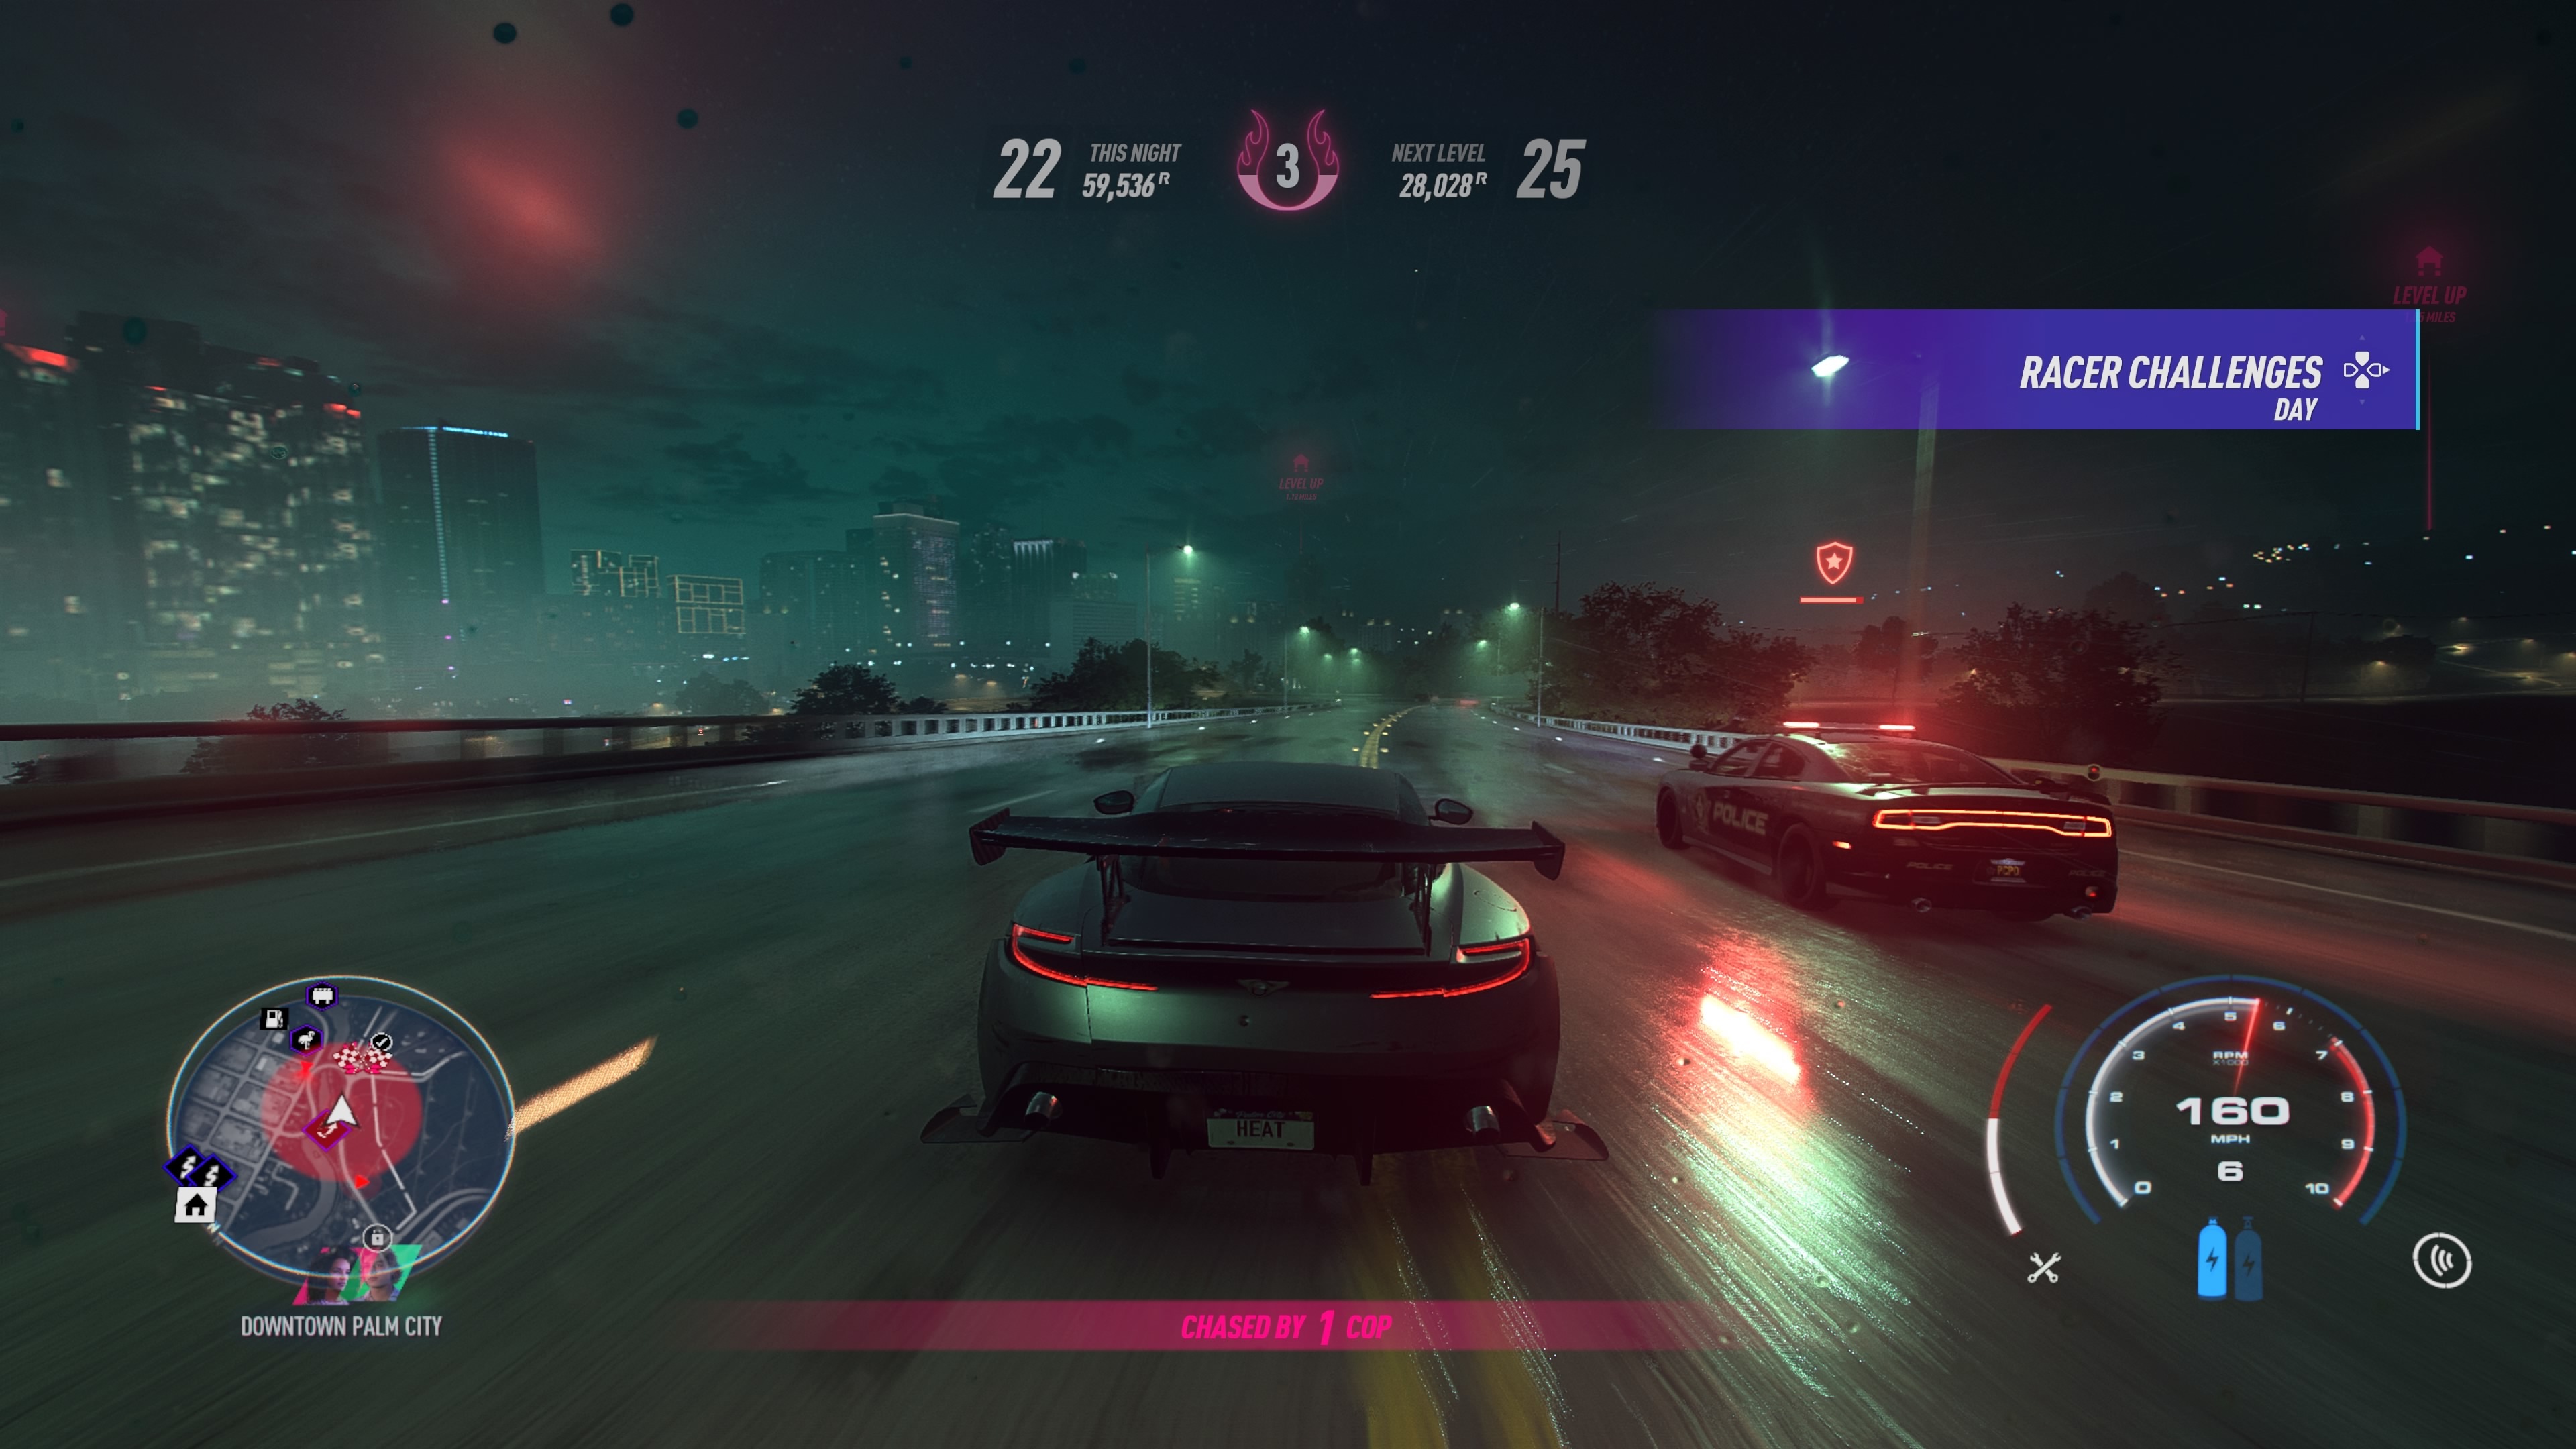 Need for Speed Heat Reviews, Pros and Cons